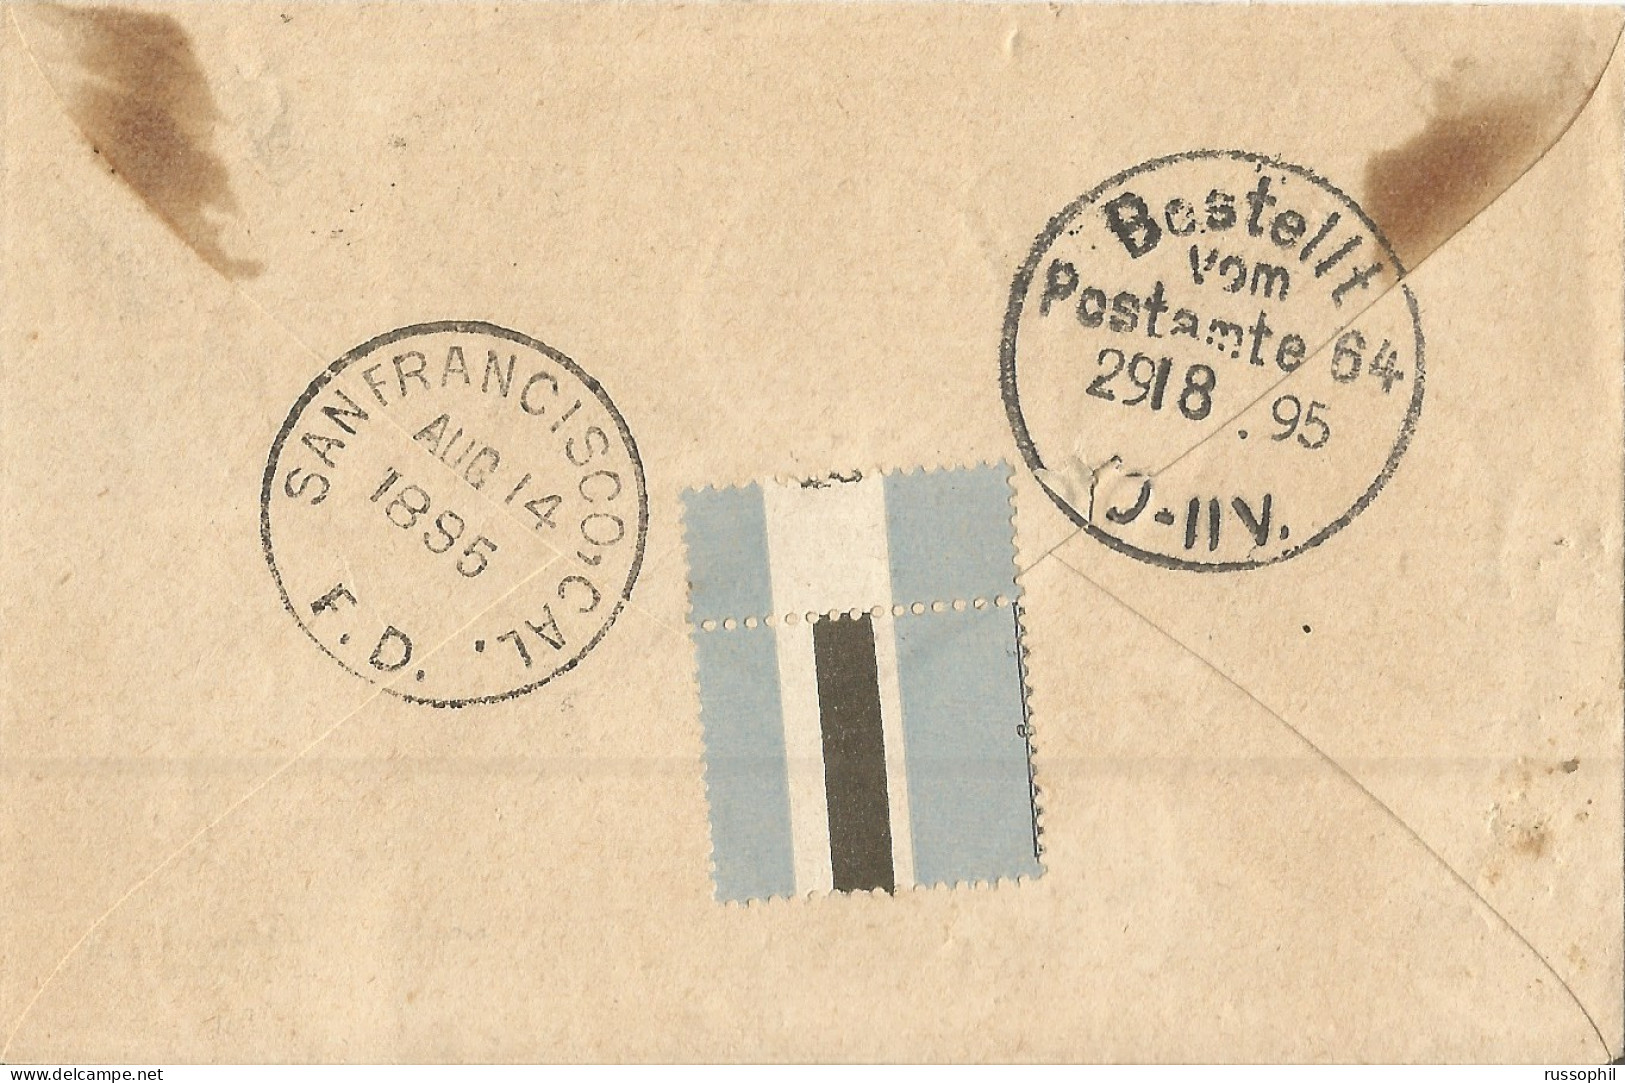 OCEANIE -  5 STAMP 20 CENT. UPRATED 5 CENT. POSTAL STATIONERY COVER FROM PAPEETE TO GERMANY - 1895 - Brieven En Documenten